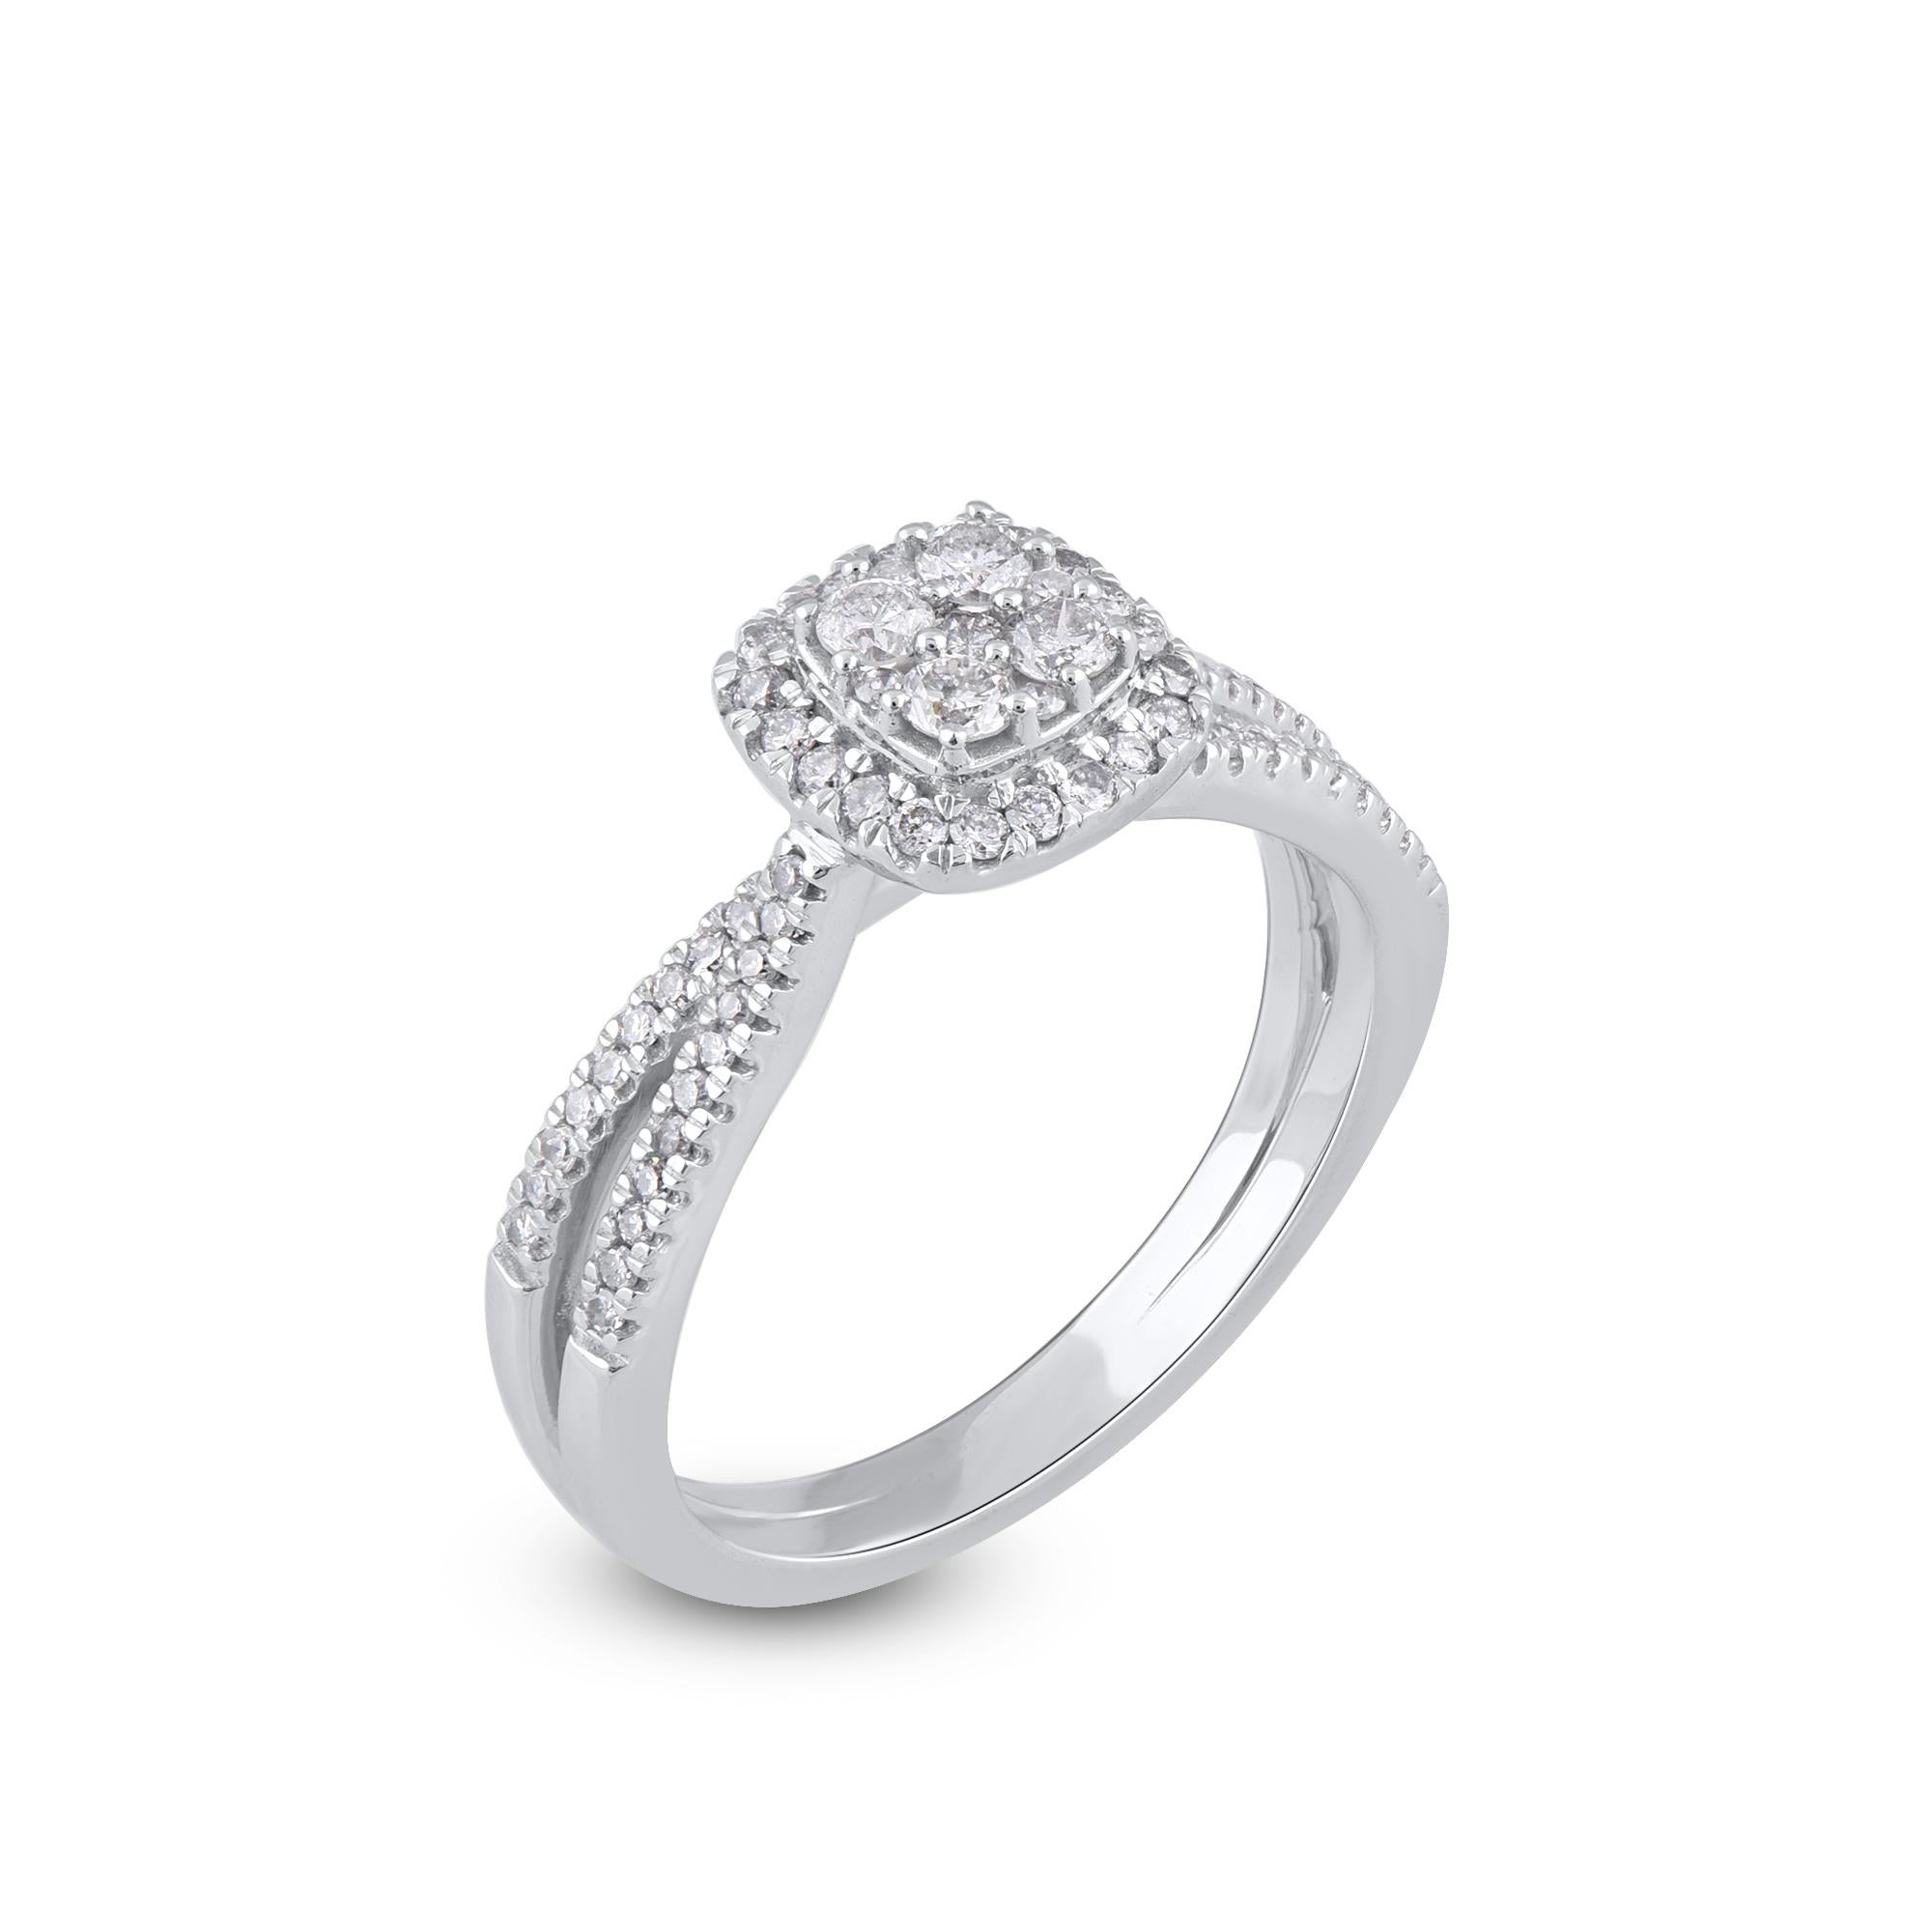 Express your love for her in the most classic way with this diamond ring. Crafted in 14 Karat white gold. This wedding ring features a sparkling 75 single cut and brilliant cut round diamond beautifully set in prong & pressure setting. The total